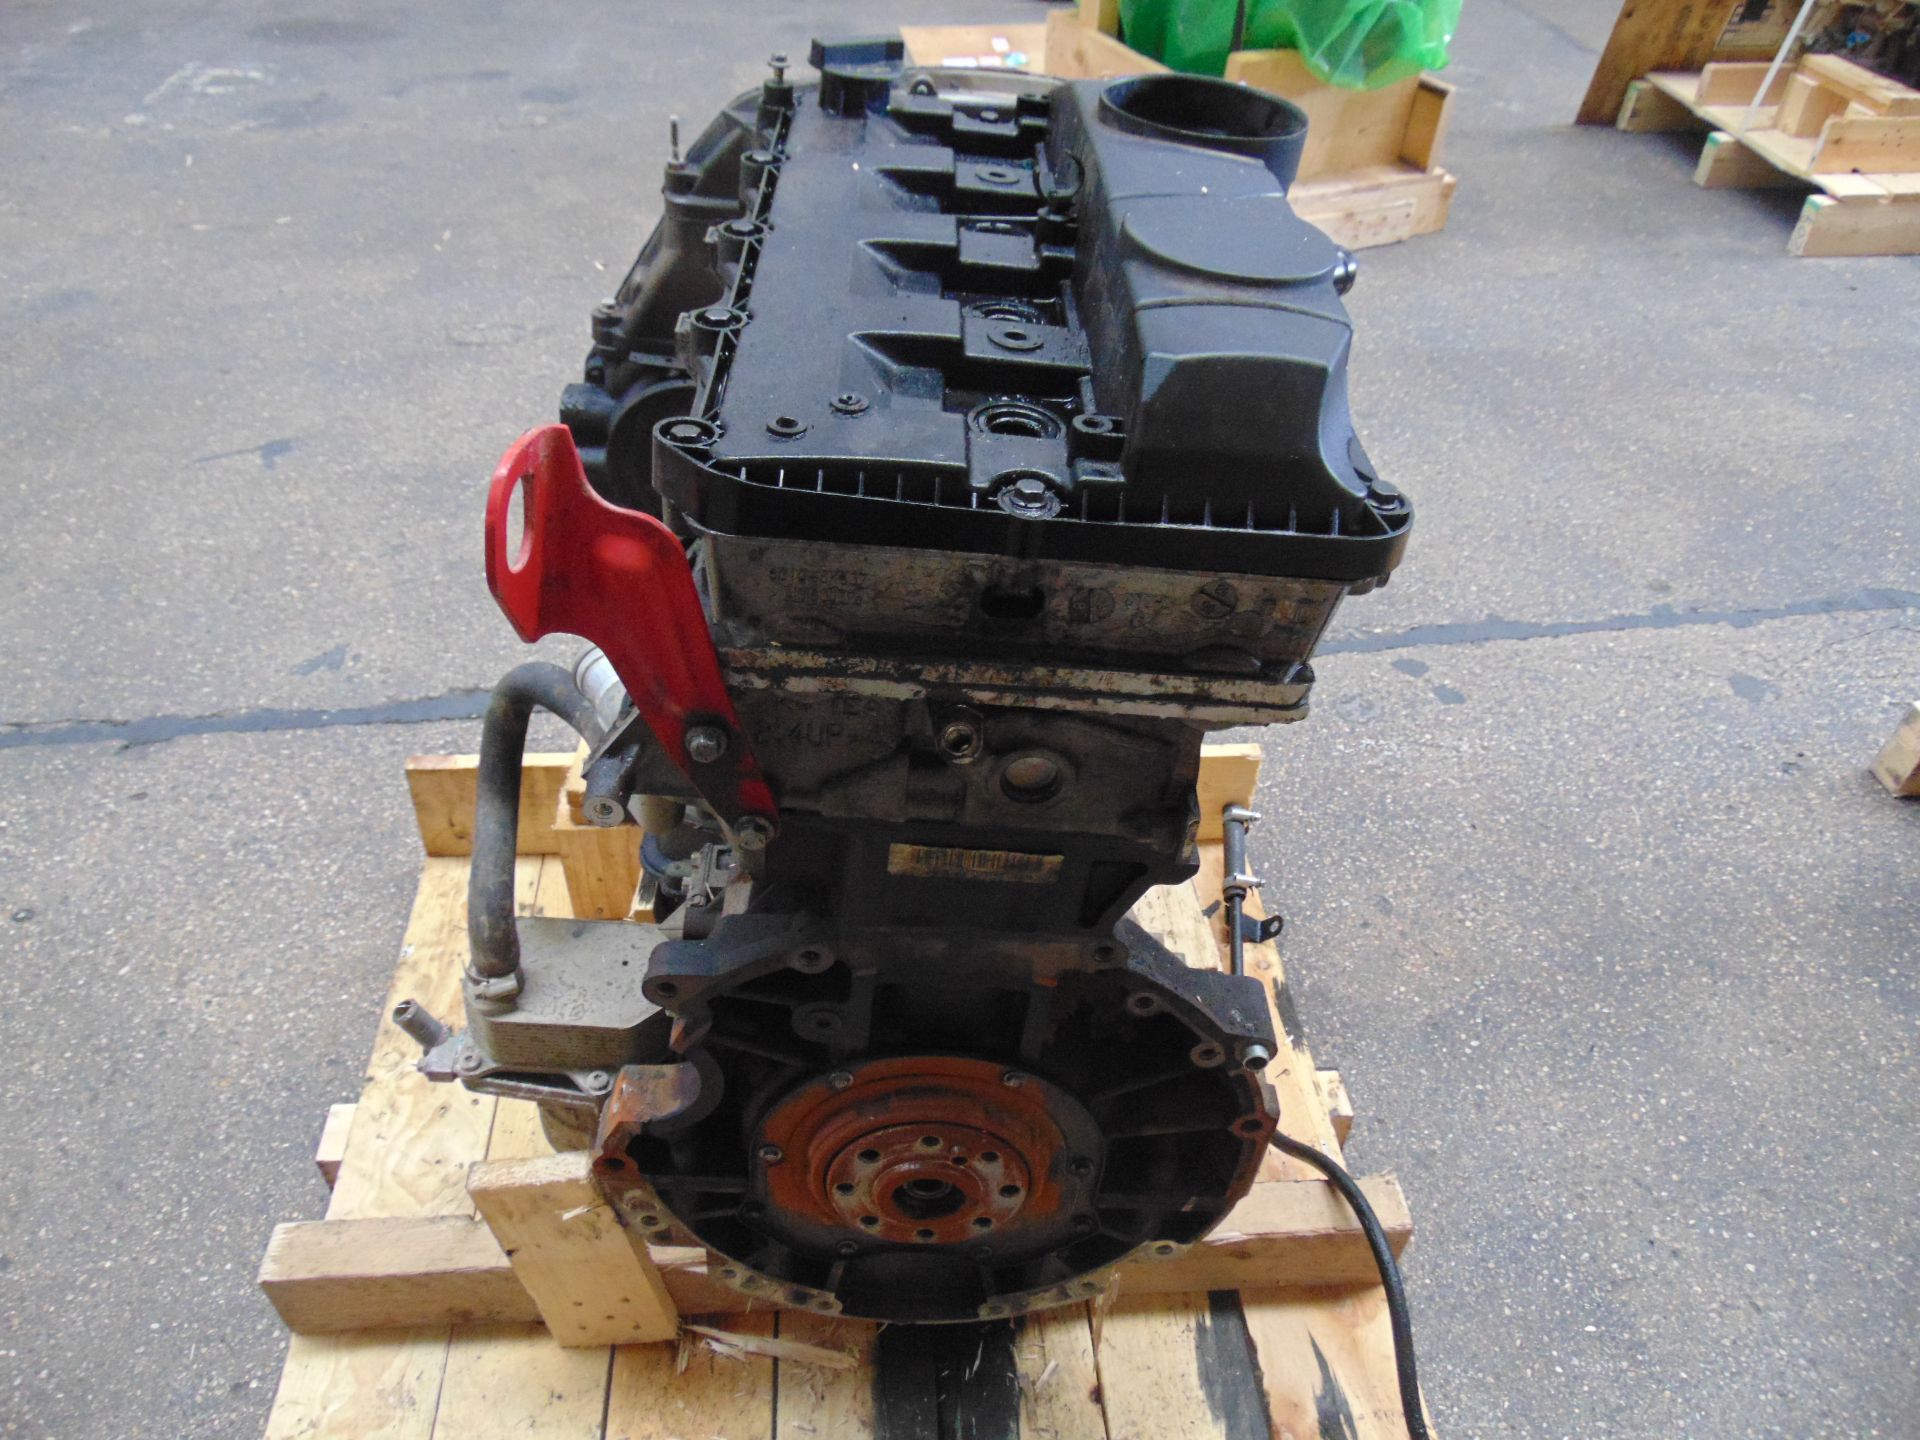 Land Rover 2.4L Ford Puma Takeout Diesel Engine P/No LR016810 - Image 4 of 10